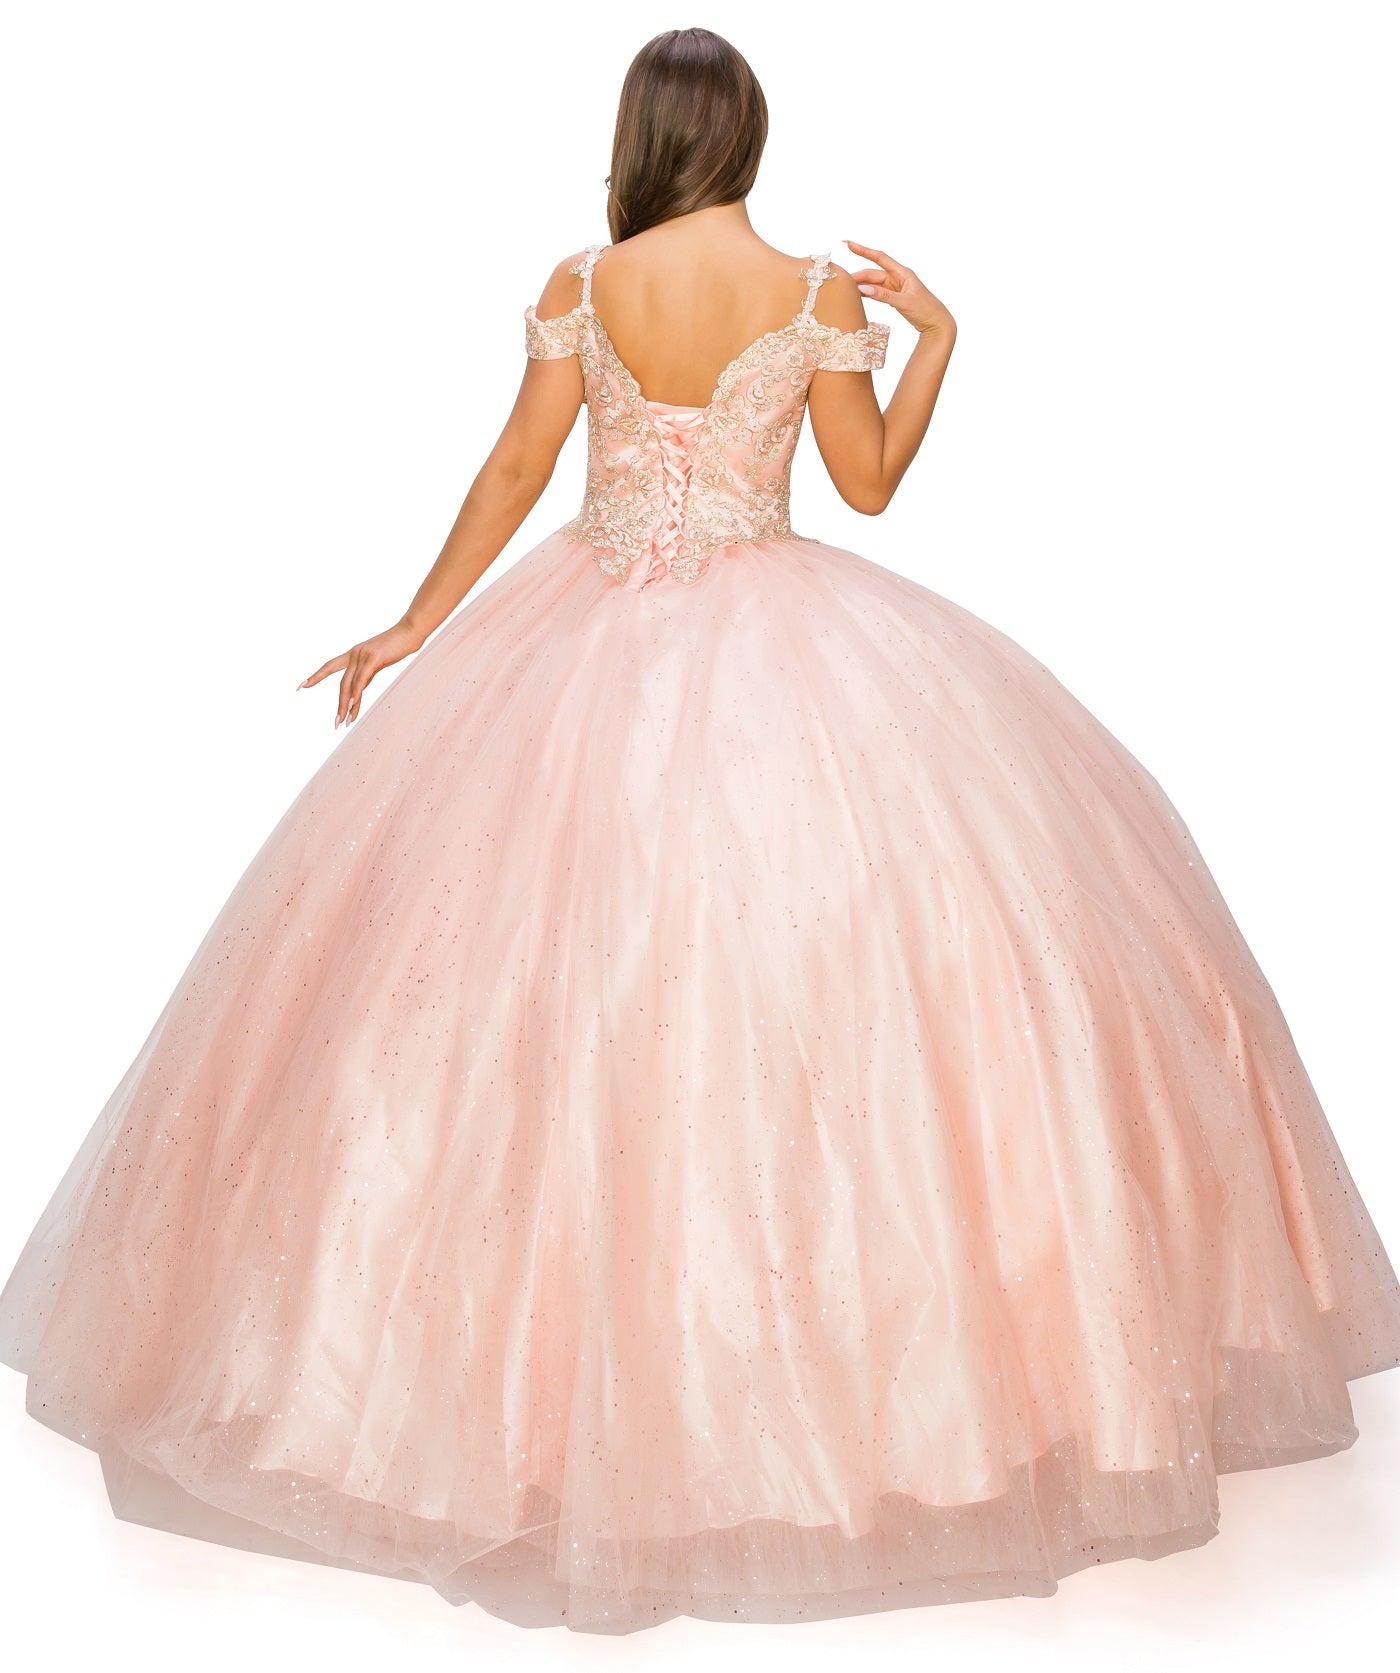 Off the Shoulder Lace Quinceanera Dress by Cinderella Couture USA AS8028J_BLUSH